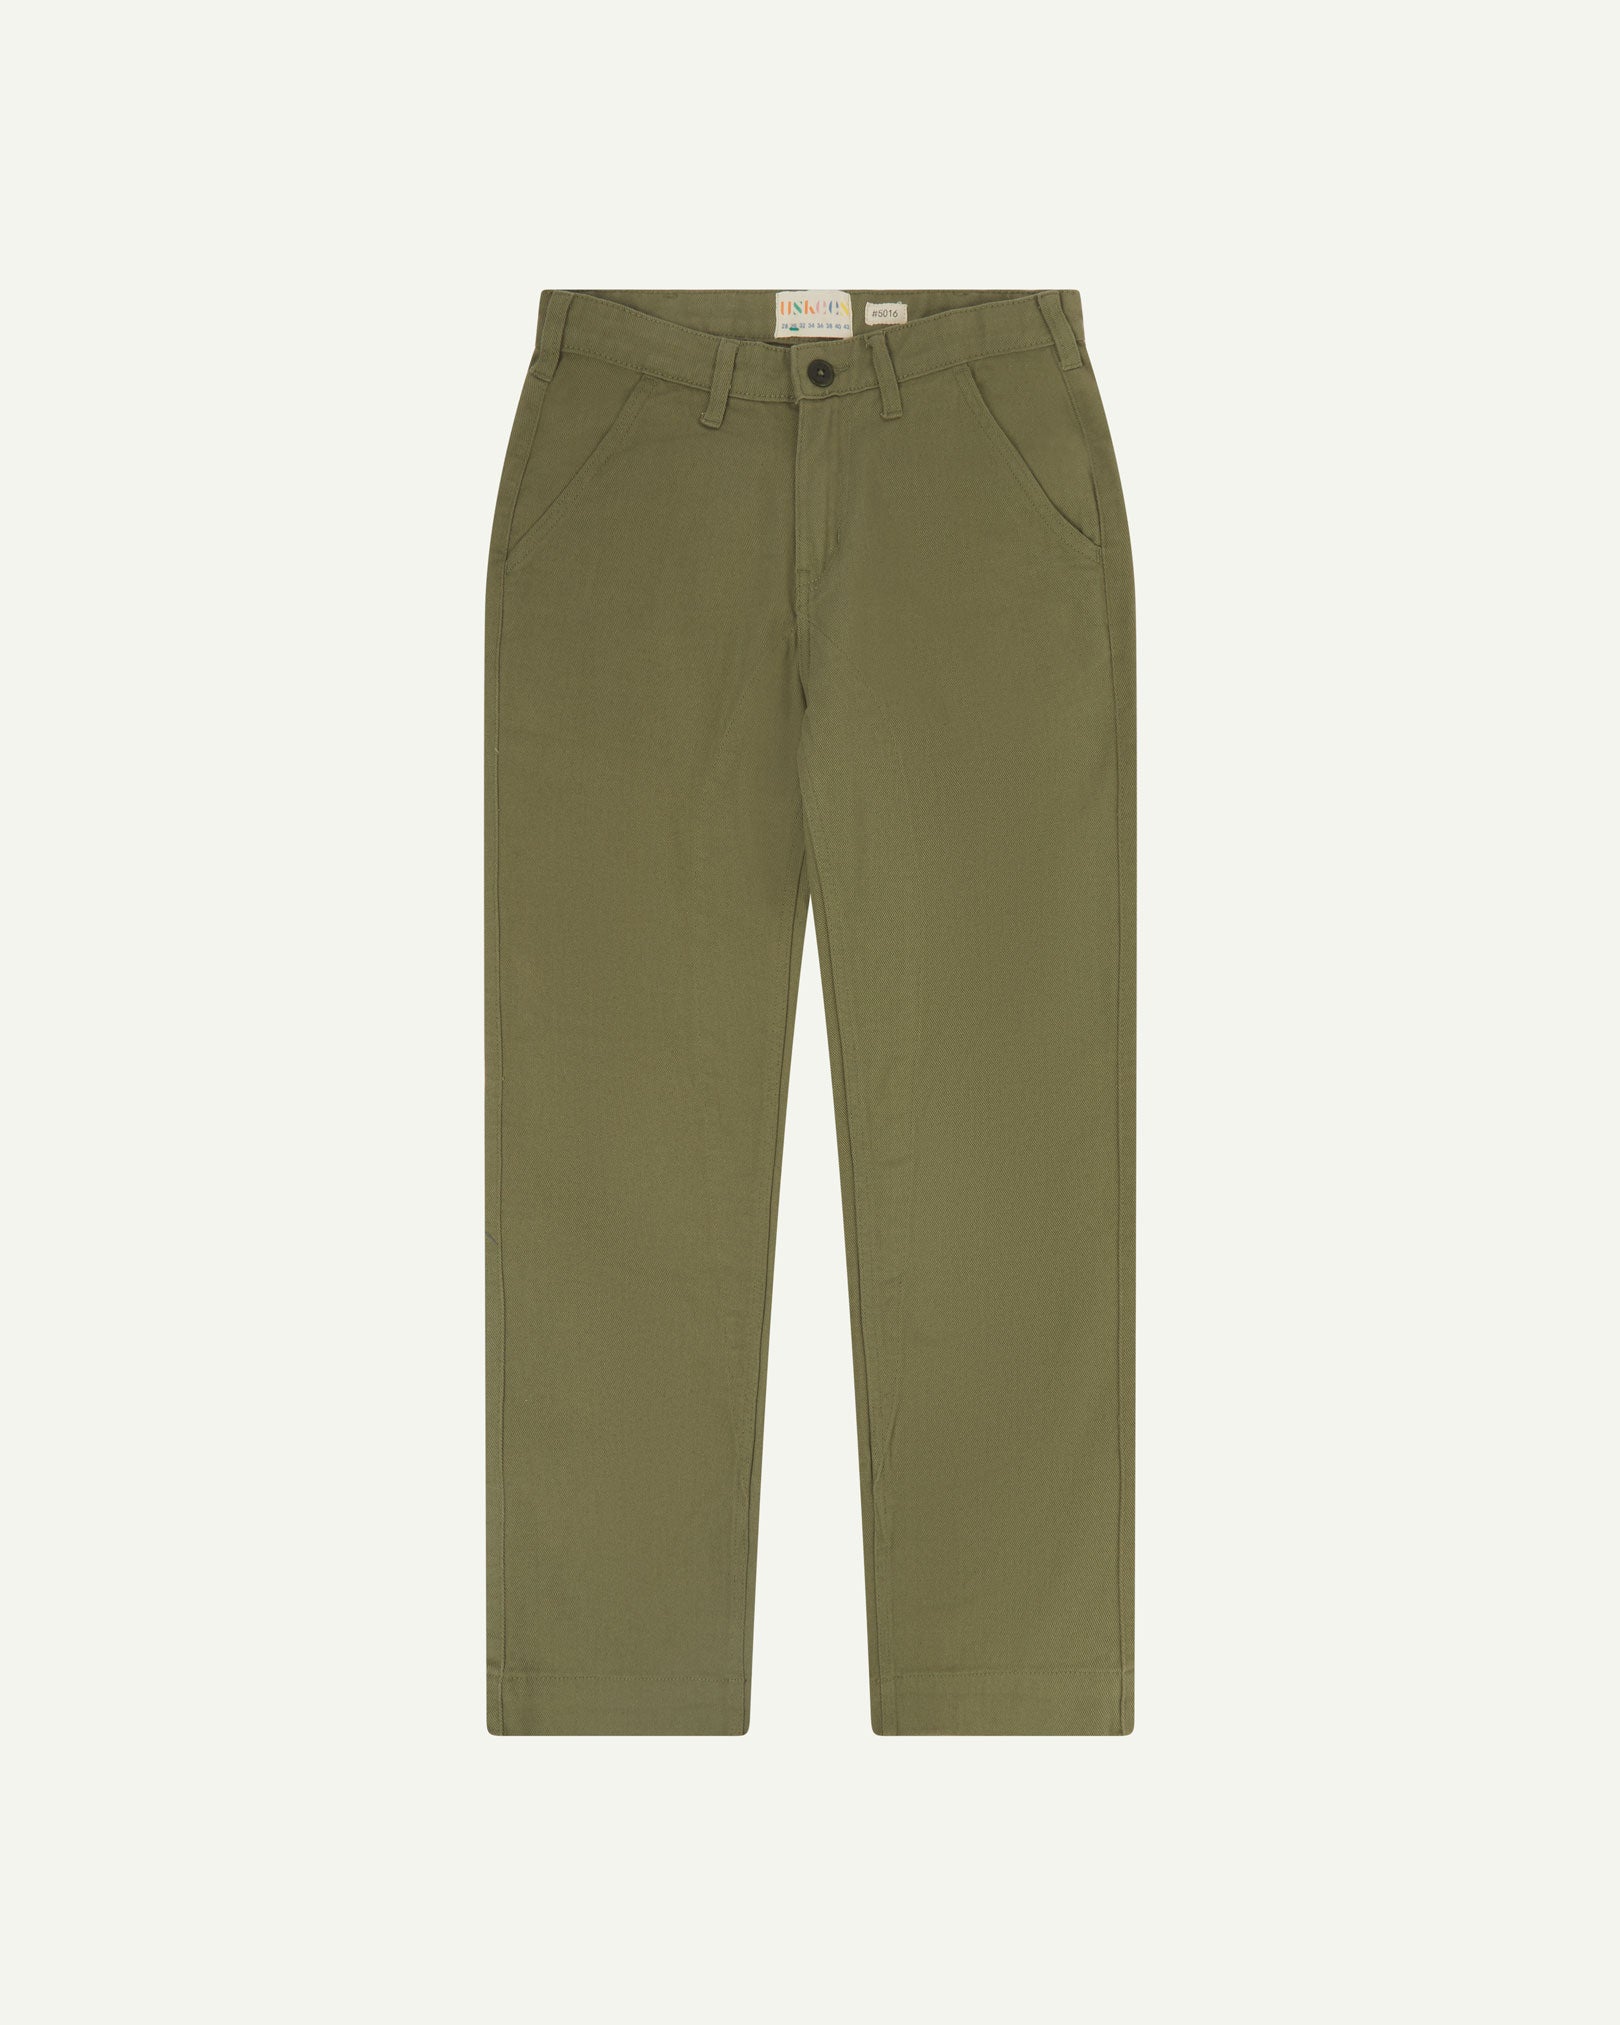 Front flat view of 5016 Uskees men's organic heavyweight drill moss green 'commuter' trousers showing straight leg fit.